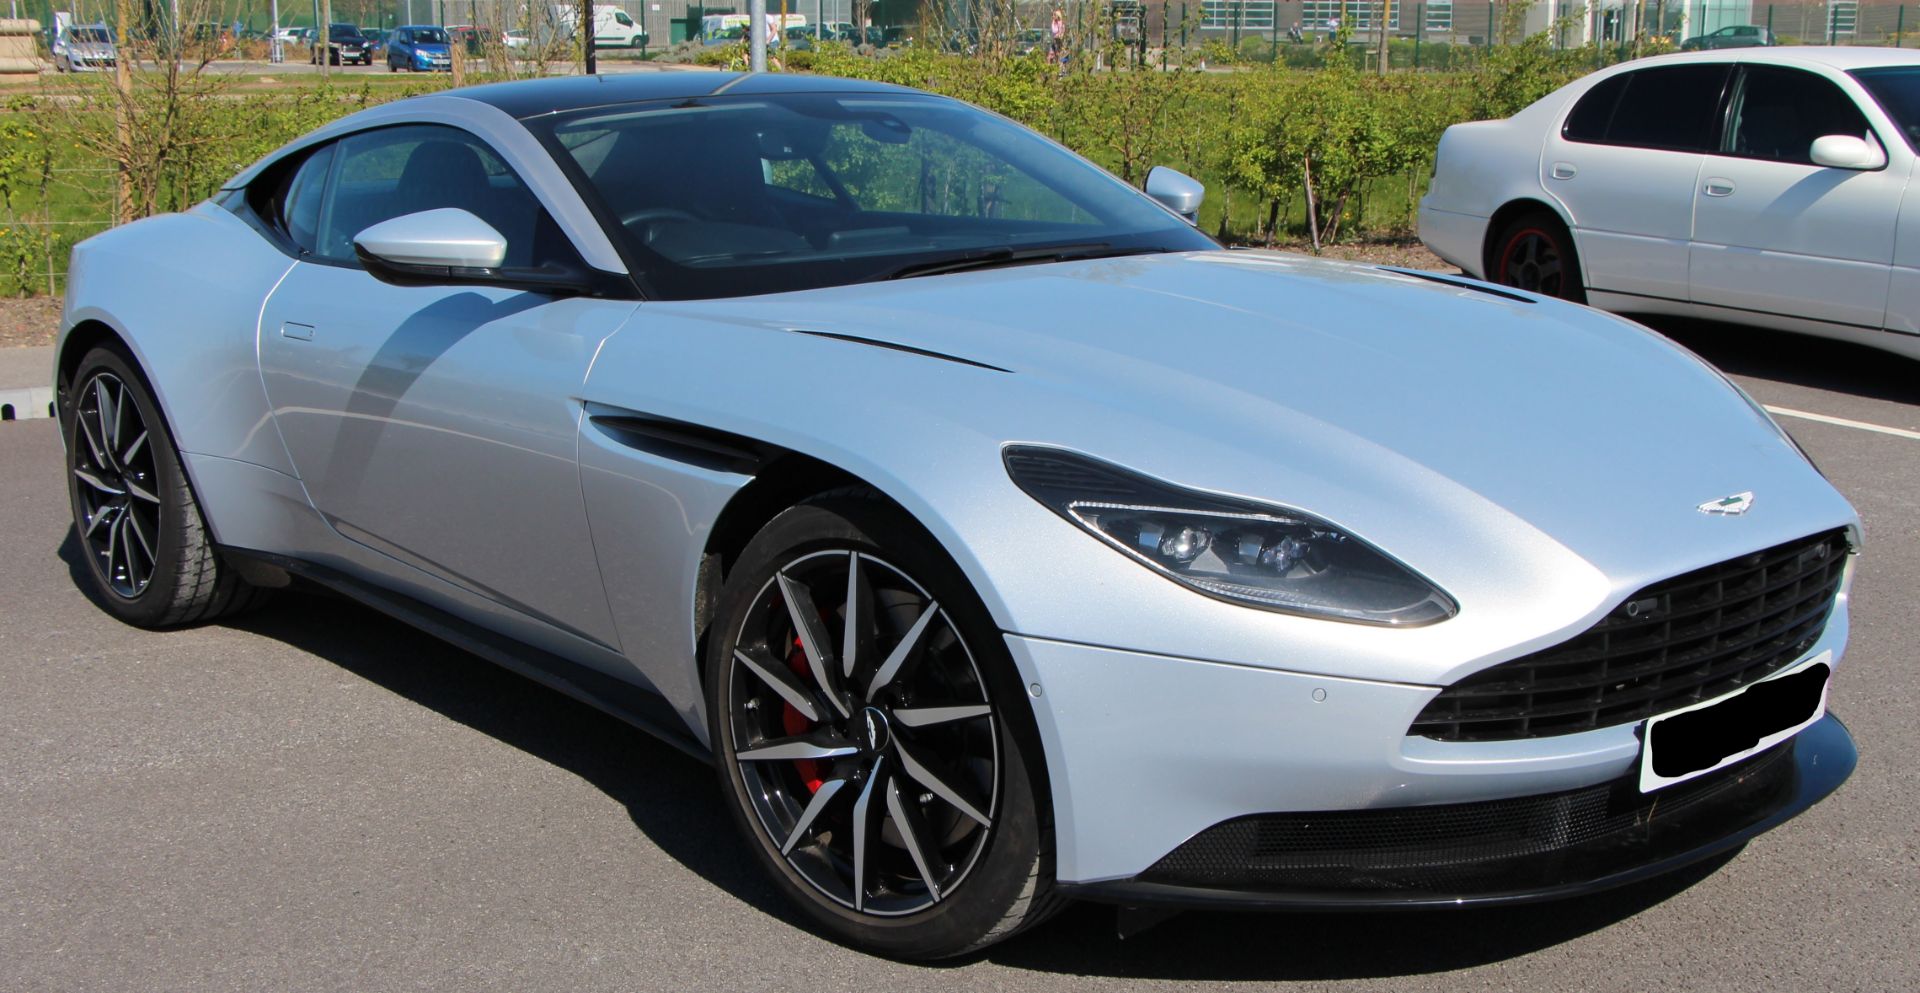 ASTON MARTIN DB11 V8 AUTOMATIC (3982cc) COUPE - 8 speed automatic - petrol - silver - dark - Image 24 of 68